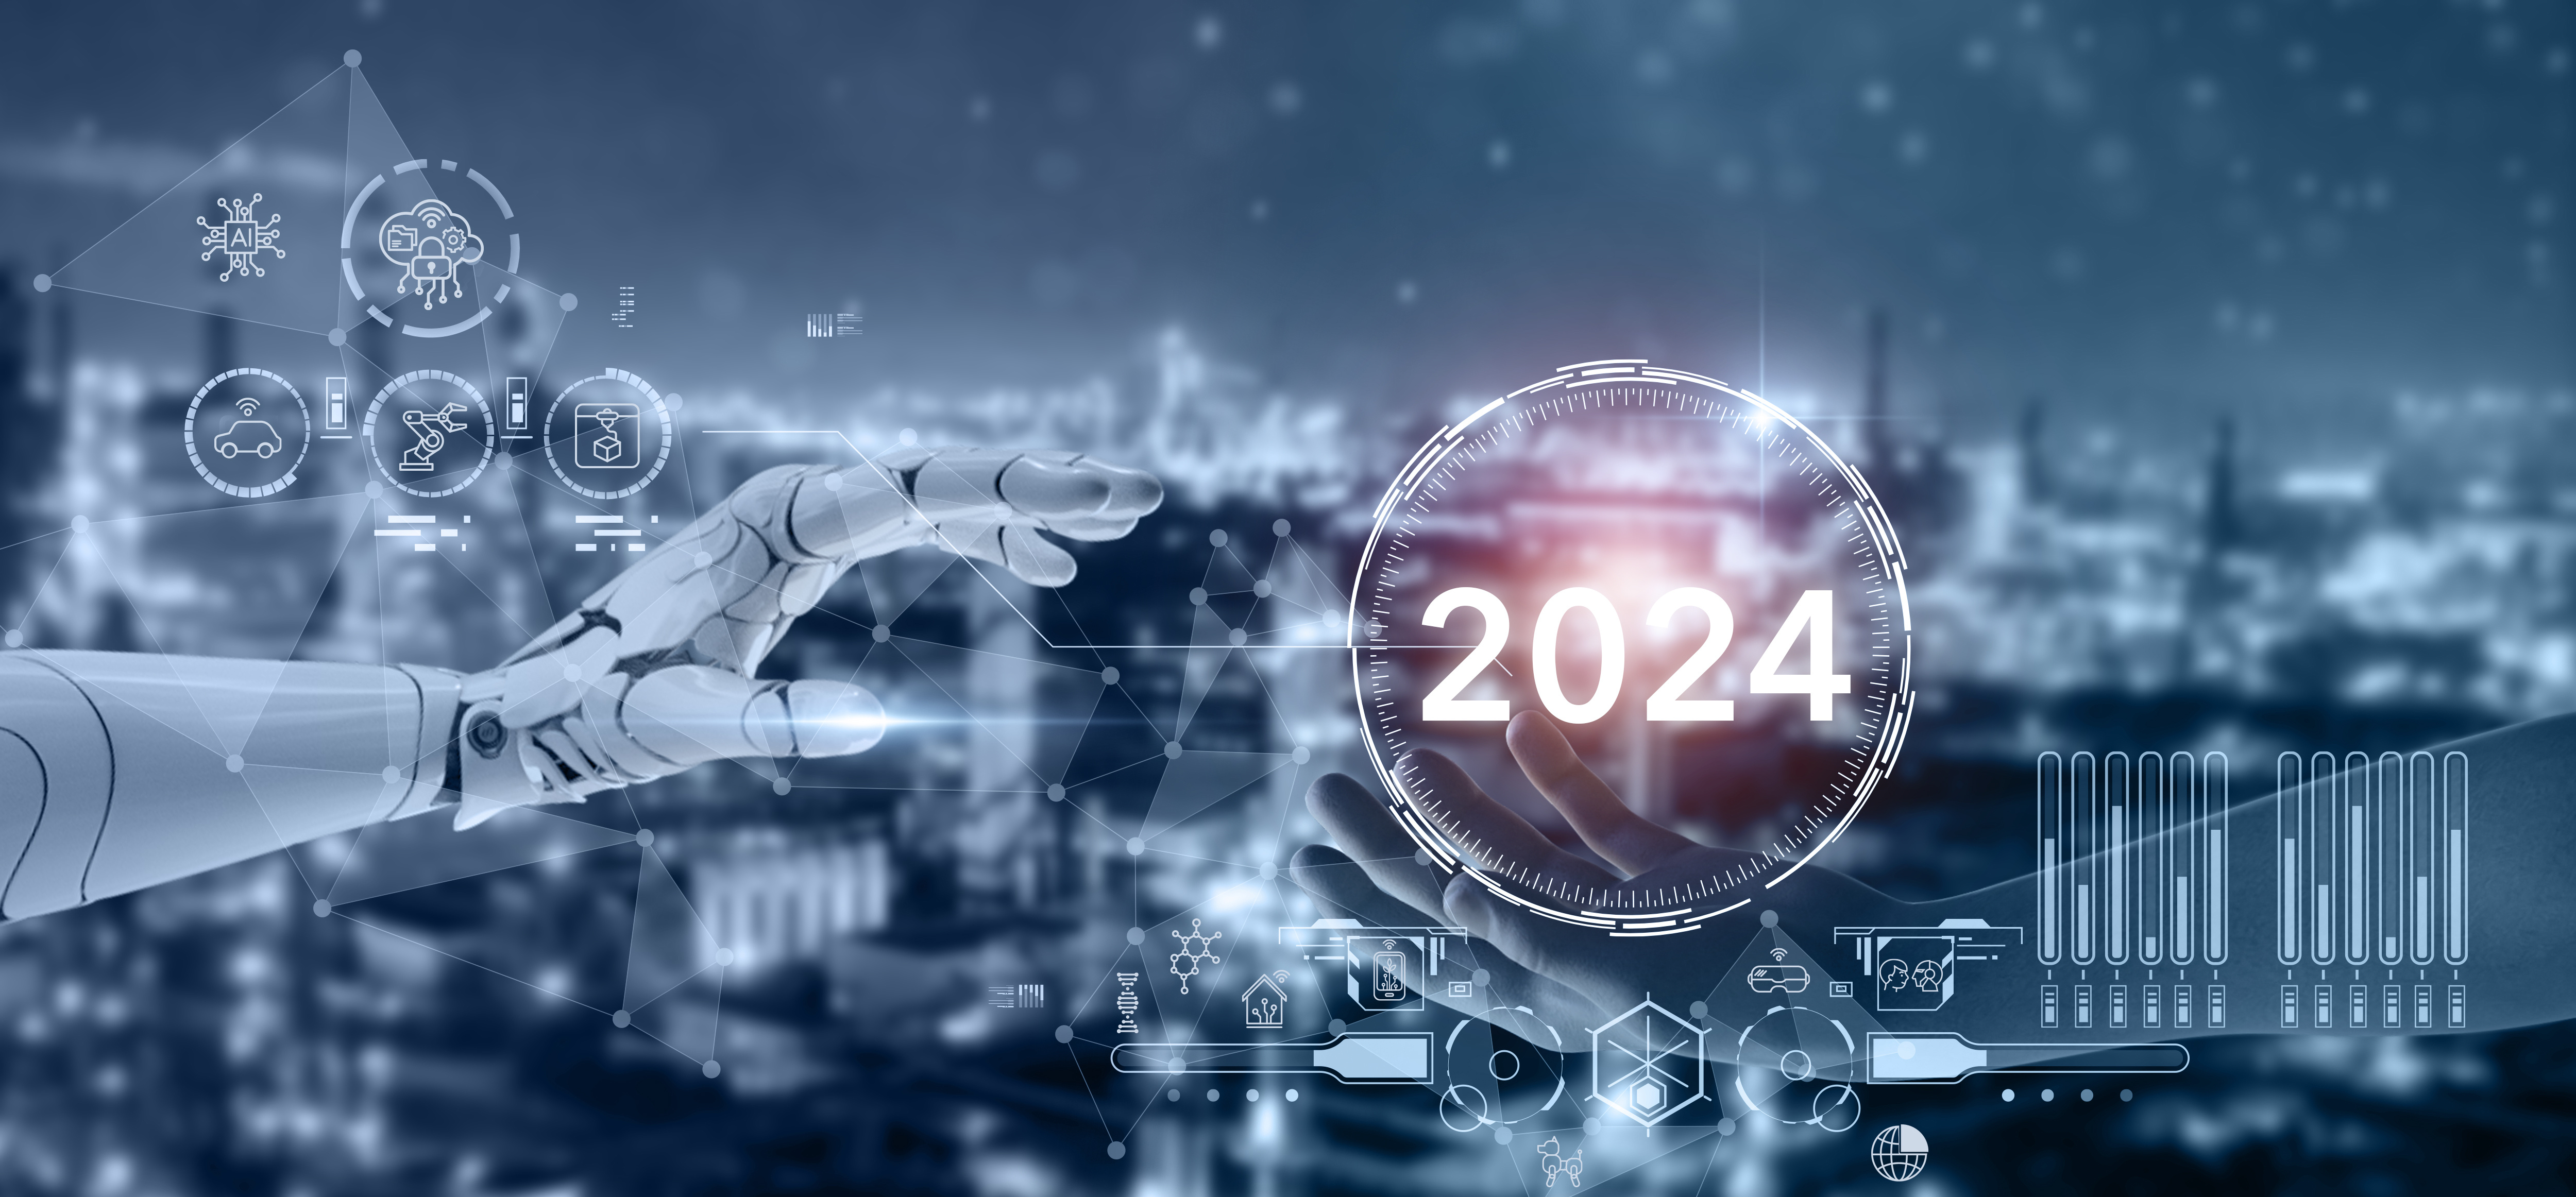 Our Trend Predictions for 2024